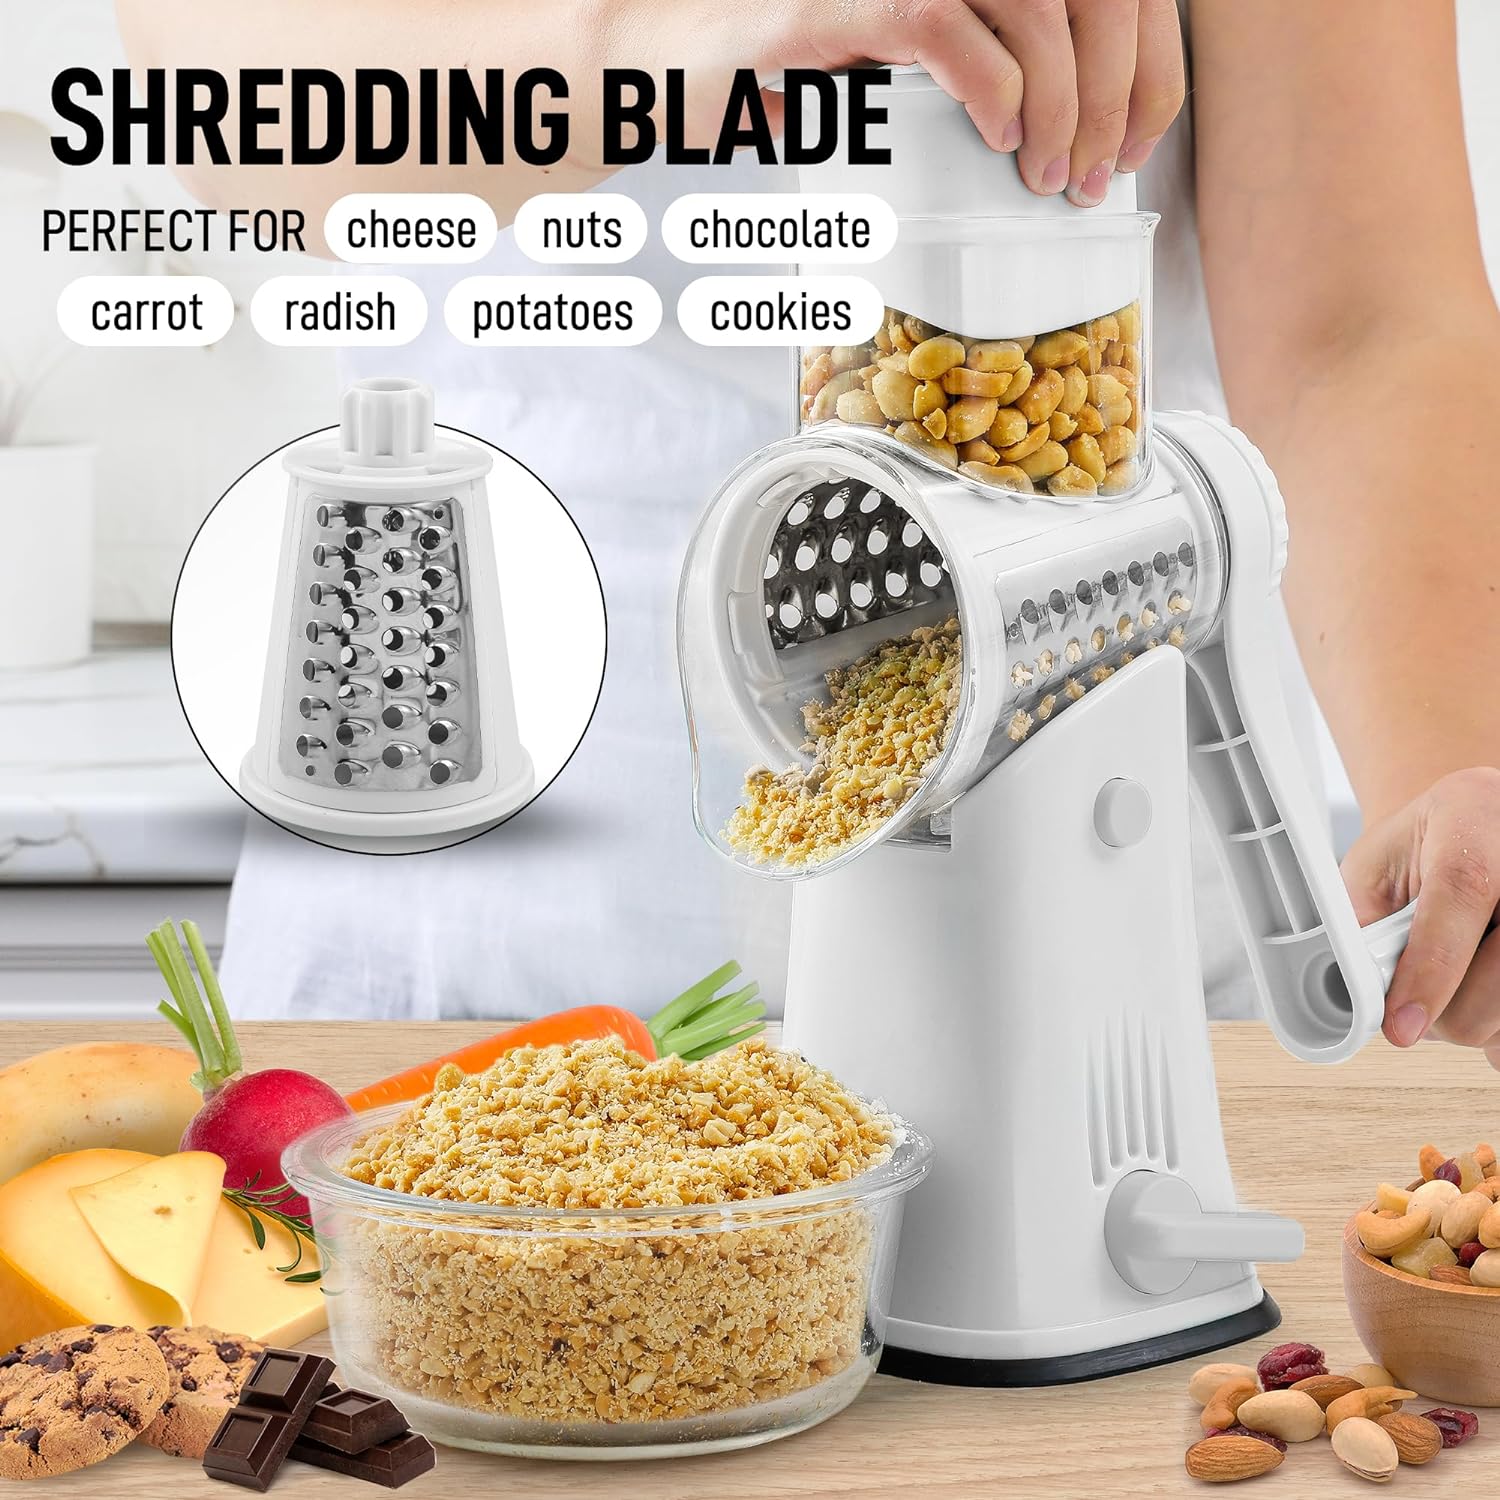 Rotary Cheese Grater with 5 Interchangeable Blades